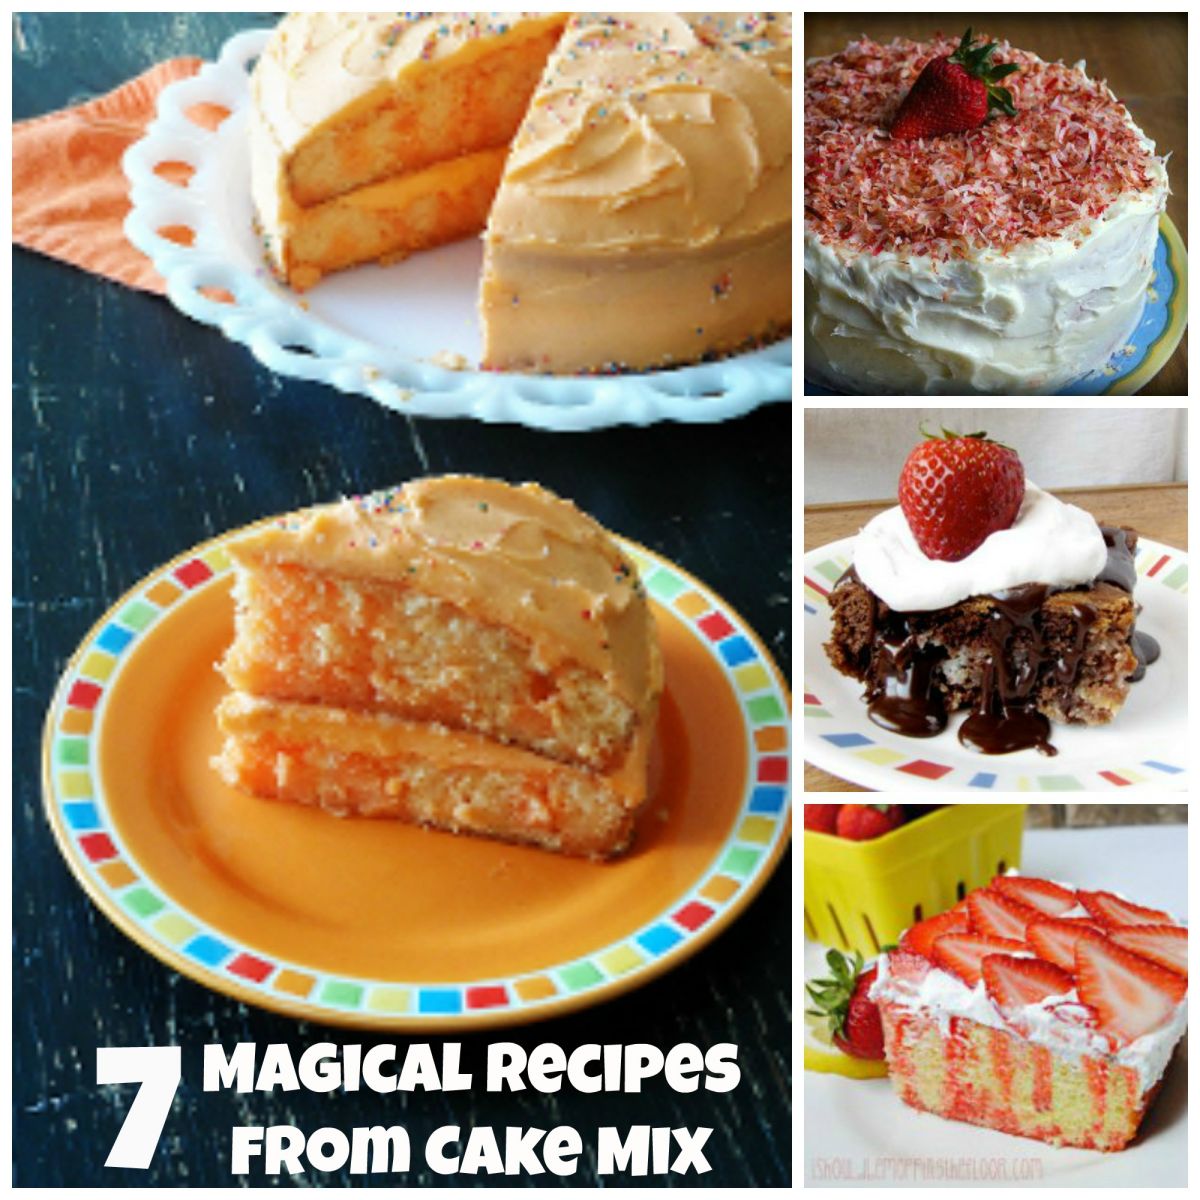 Magical Recipes from Cake Mix